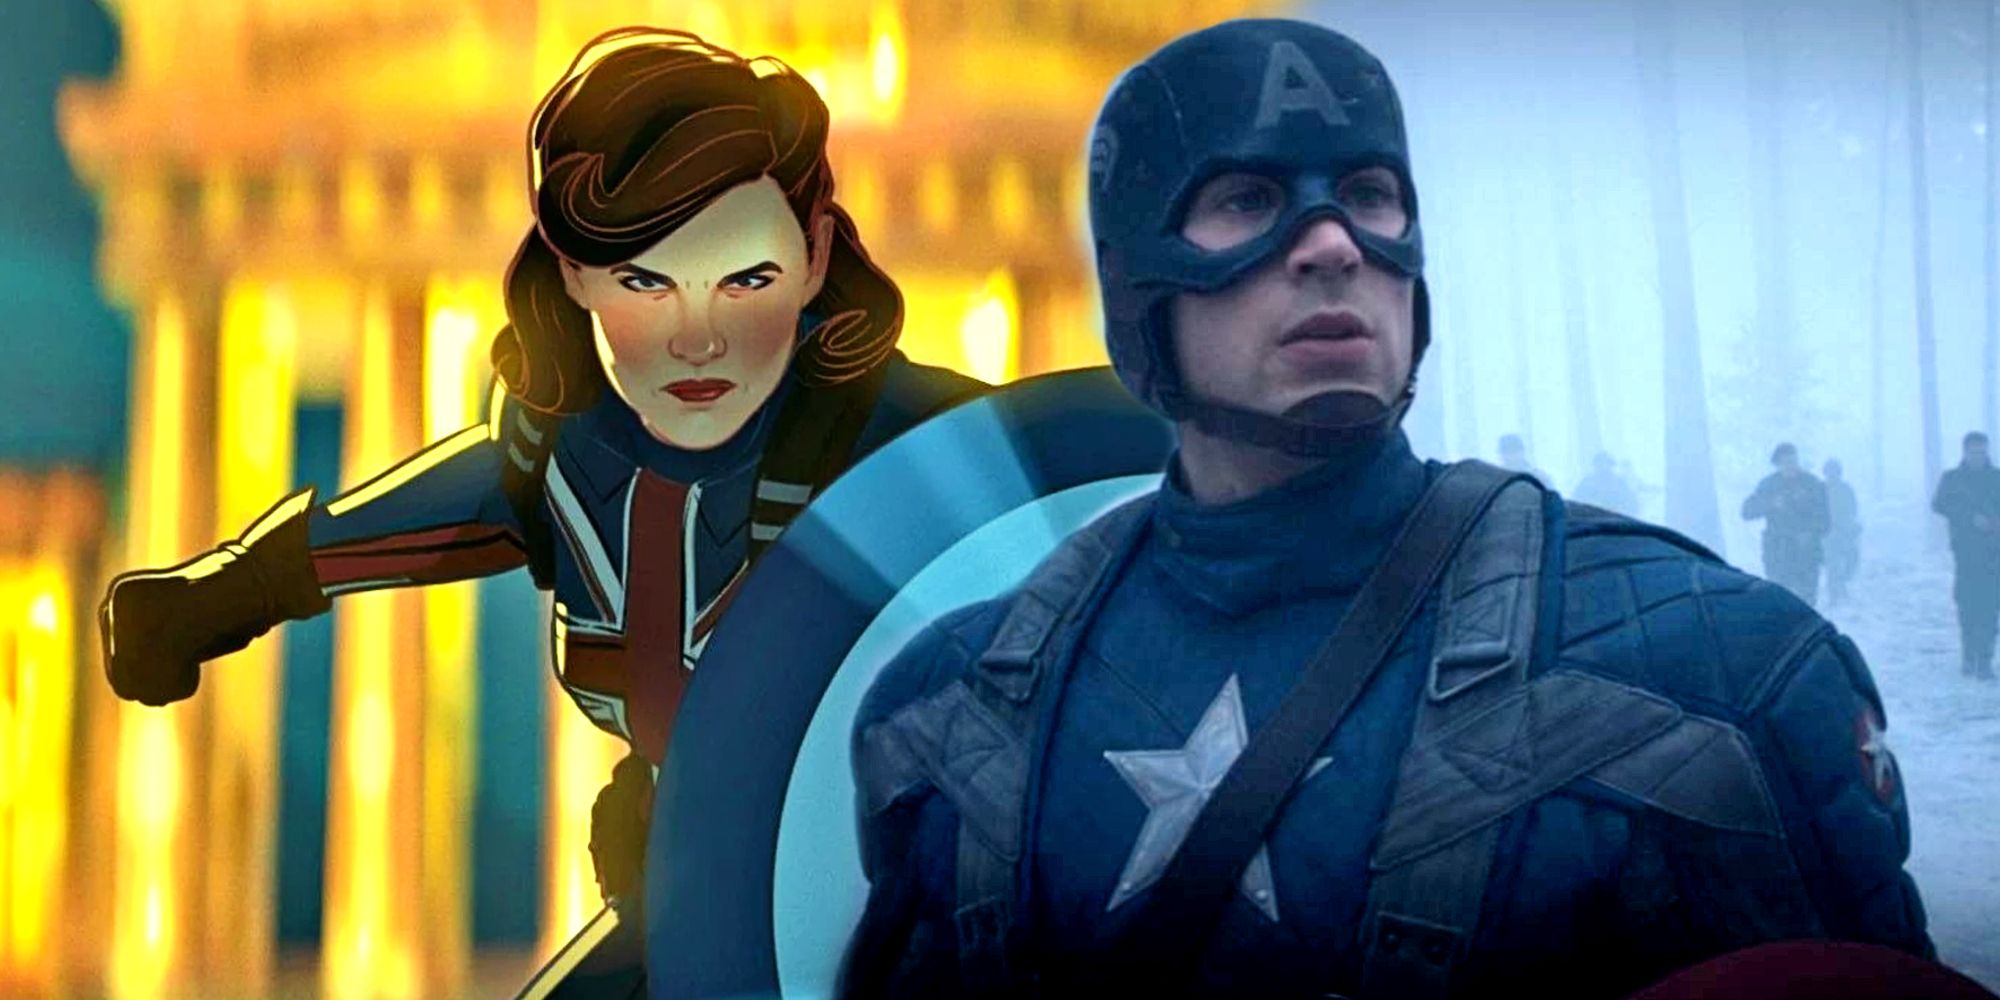 Blended image showing Captain Carter and Captain America in What If and The First Avenger